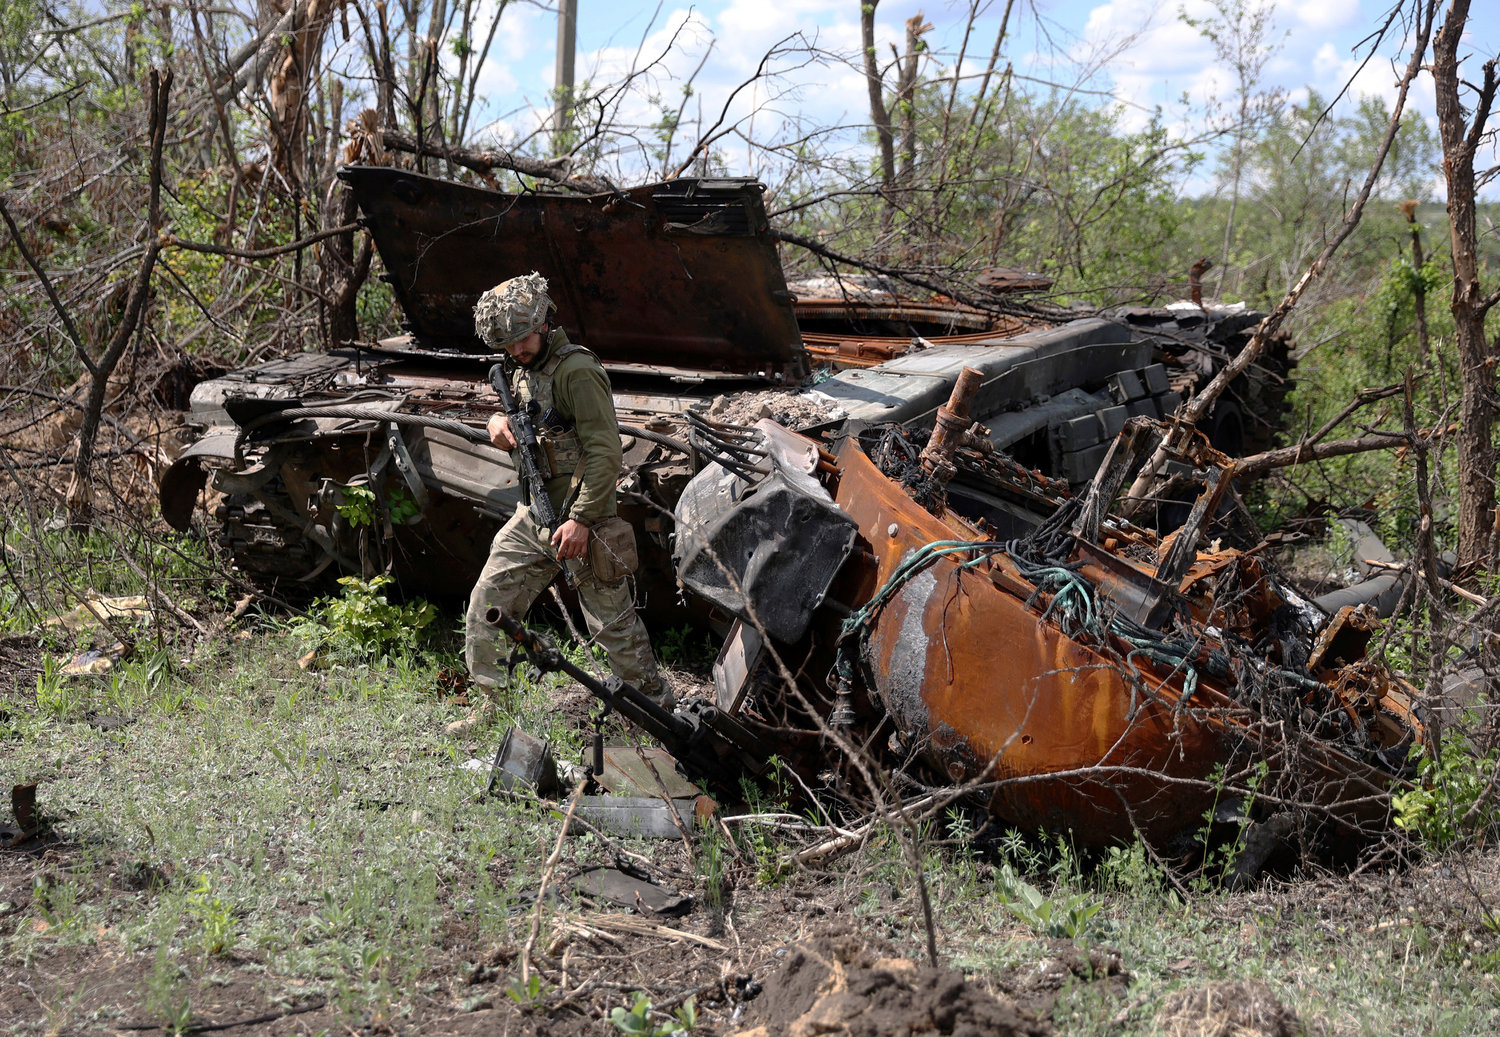 A Ukrainian serviceman inspects a destroyed Russian tank at an abandonned Russian position near the village of Bilogorivka not far from Lysychansk, Lugansk region, on June 17, 2022. (Anatolii Stepanov/AFP/Getty Images/TNS)